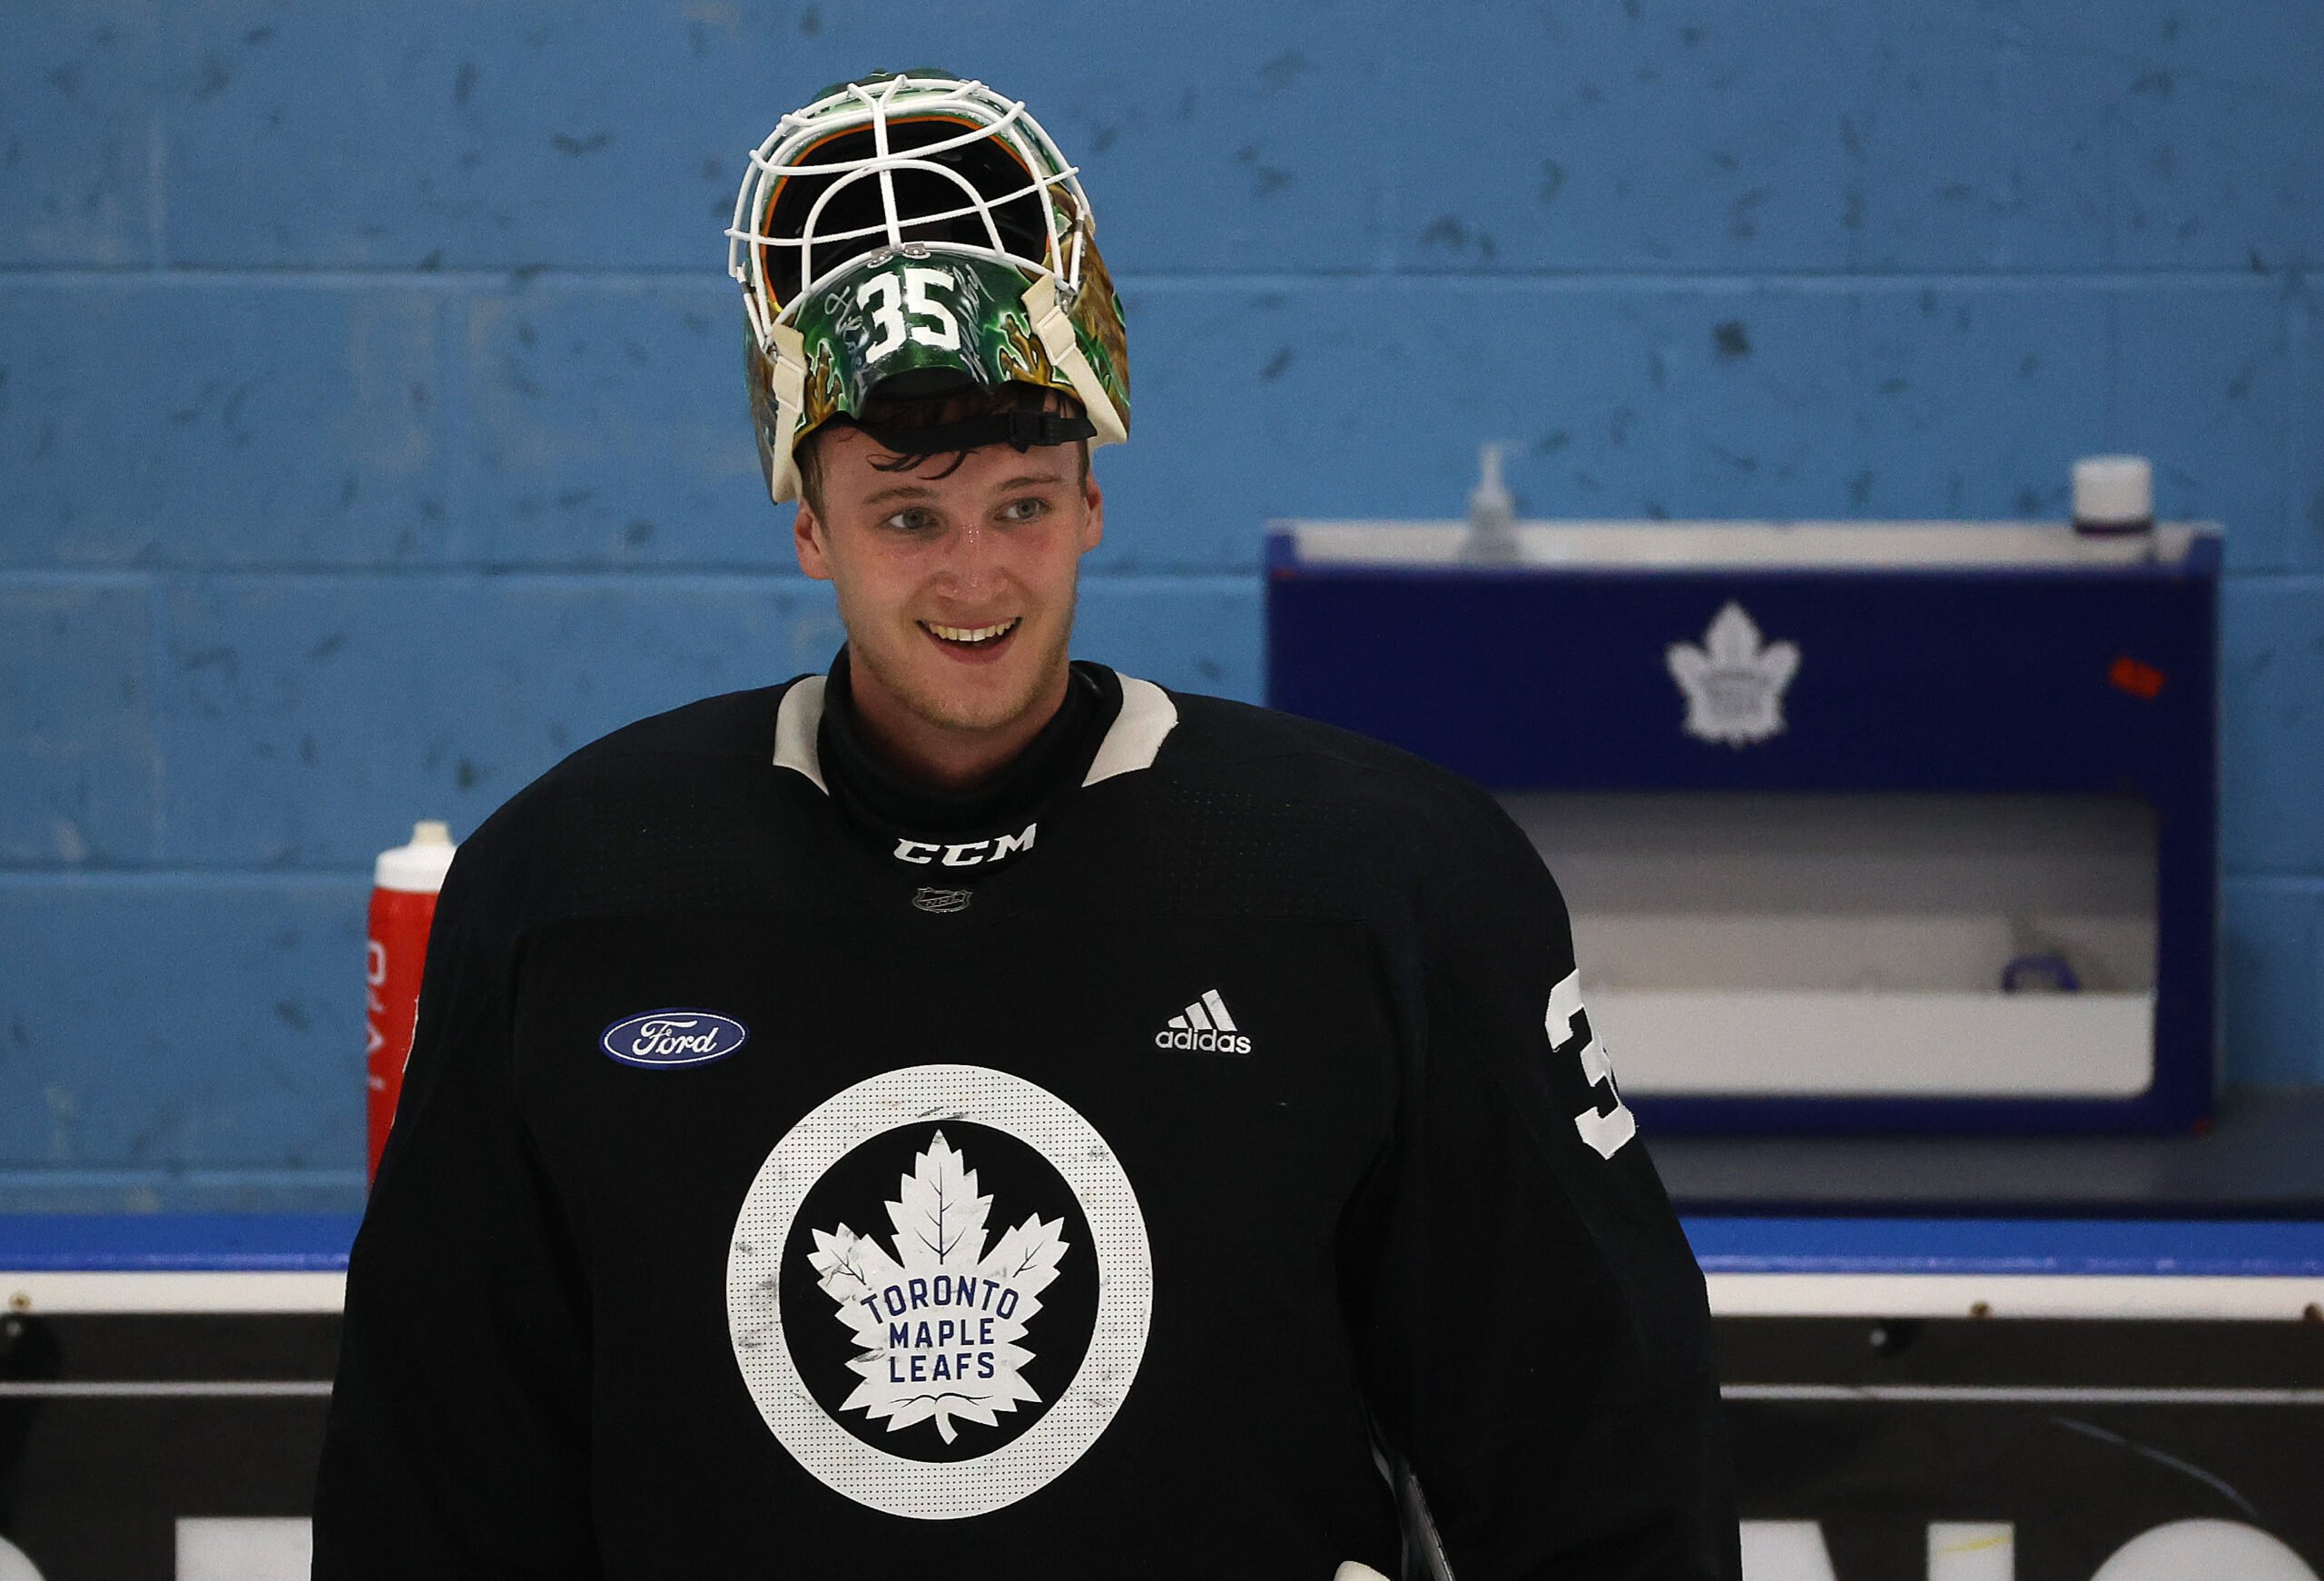 Toronto Maple Leafs Call Up Top Goaltending Prospect Dennis Hildeby to